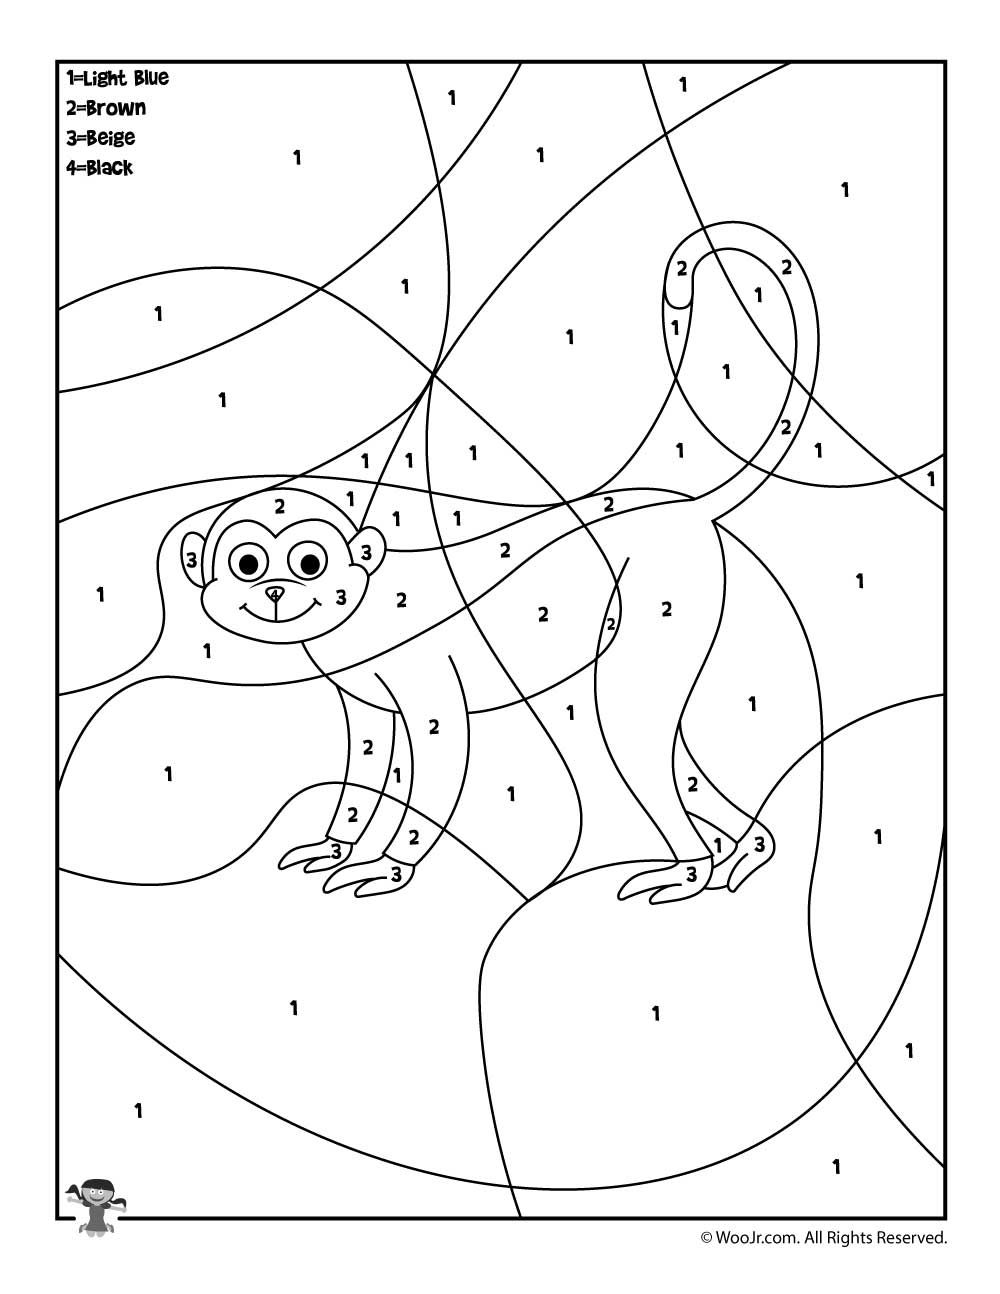 Preschool color by number animal coloring pages woo jr kids activities childrens publishing animal coloring pages preschool colors coloring pages